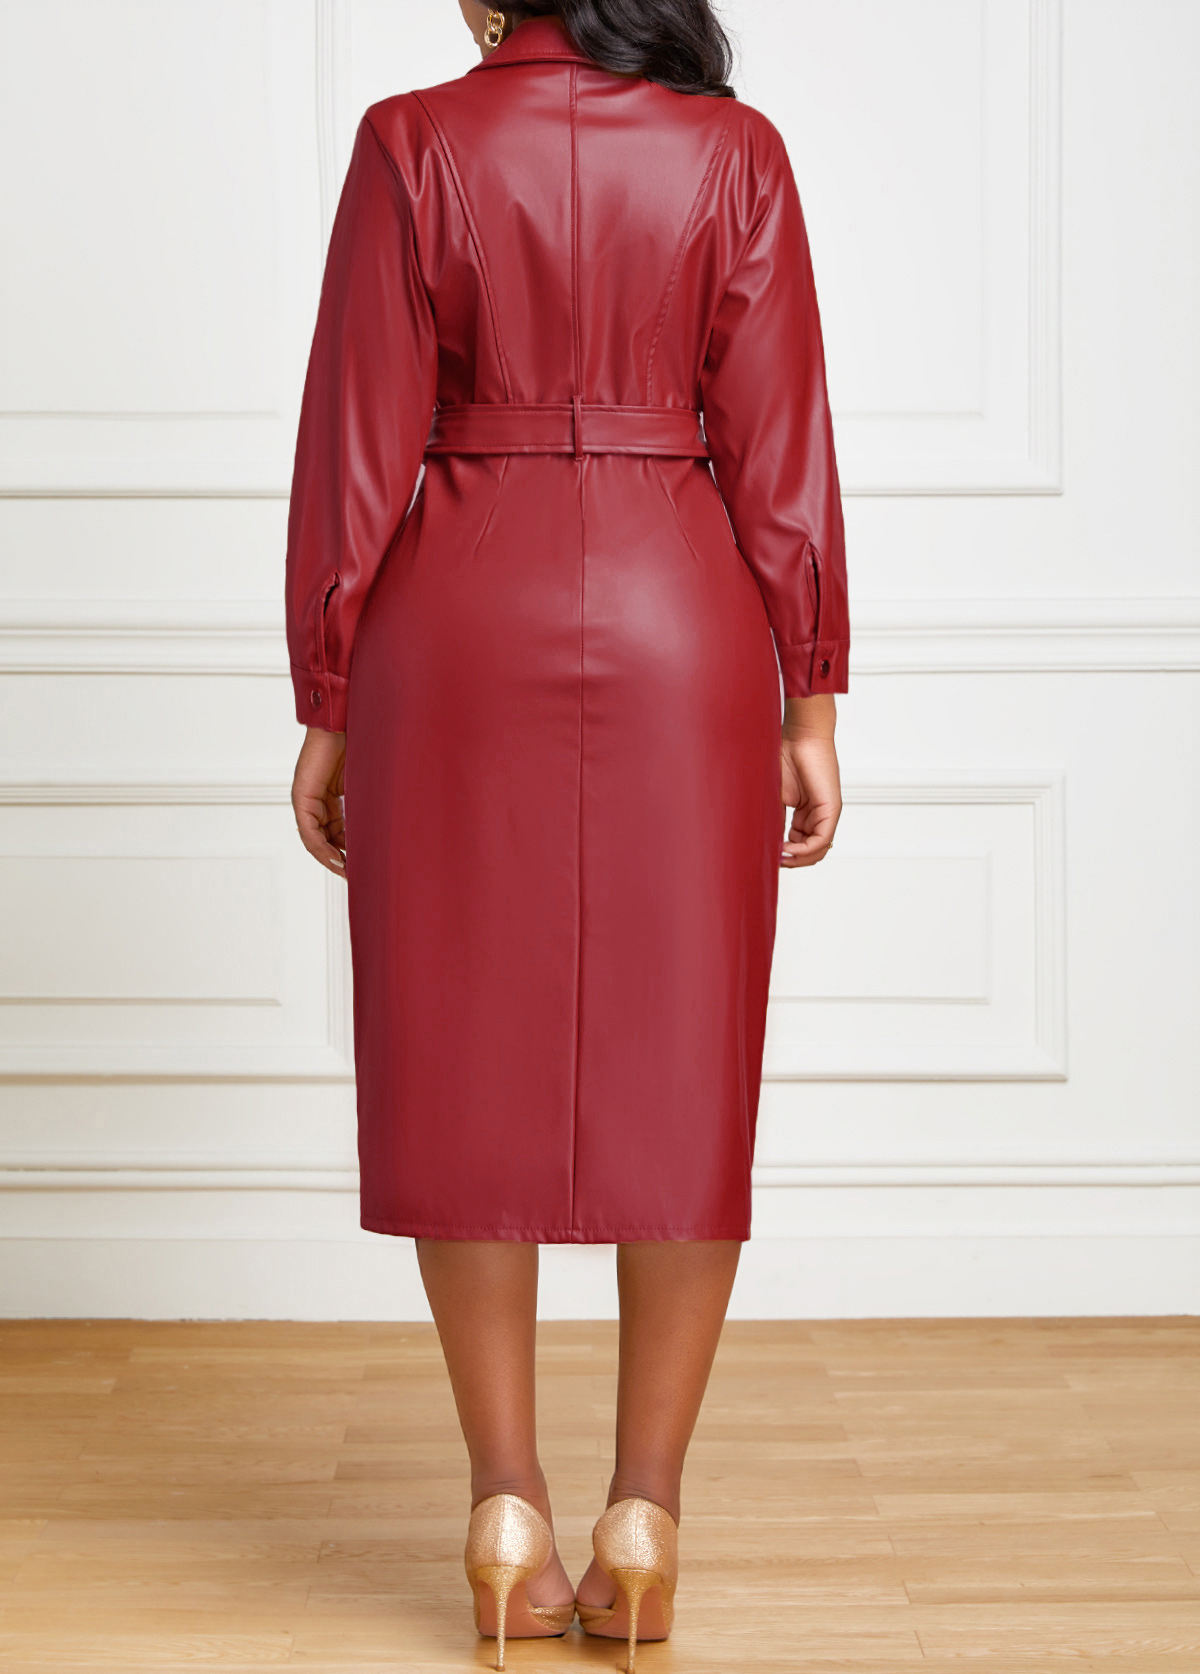 Belted Red Bodycon Turn Down Collar Dress